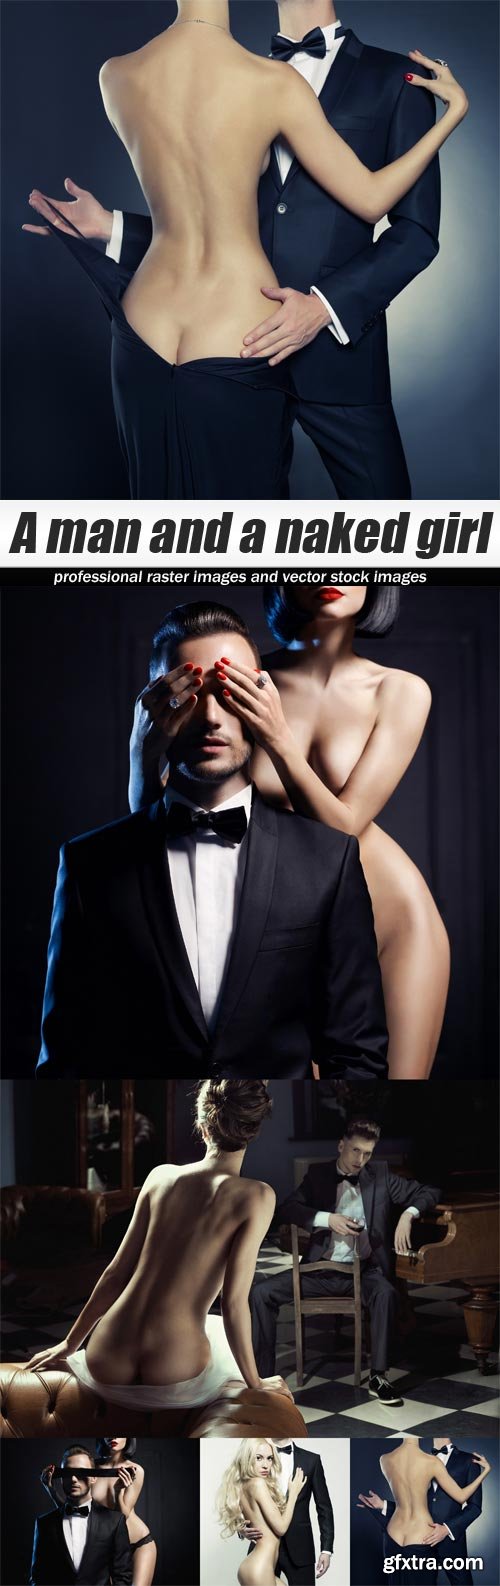 A man and a naked girl